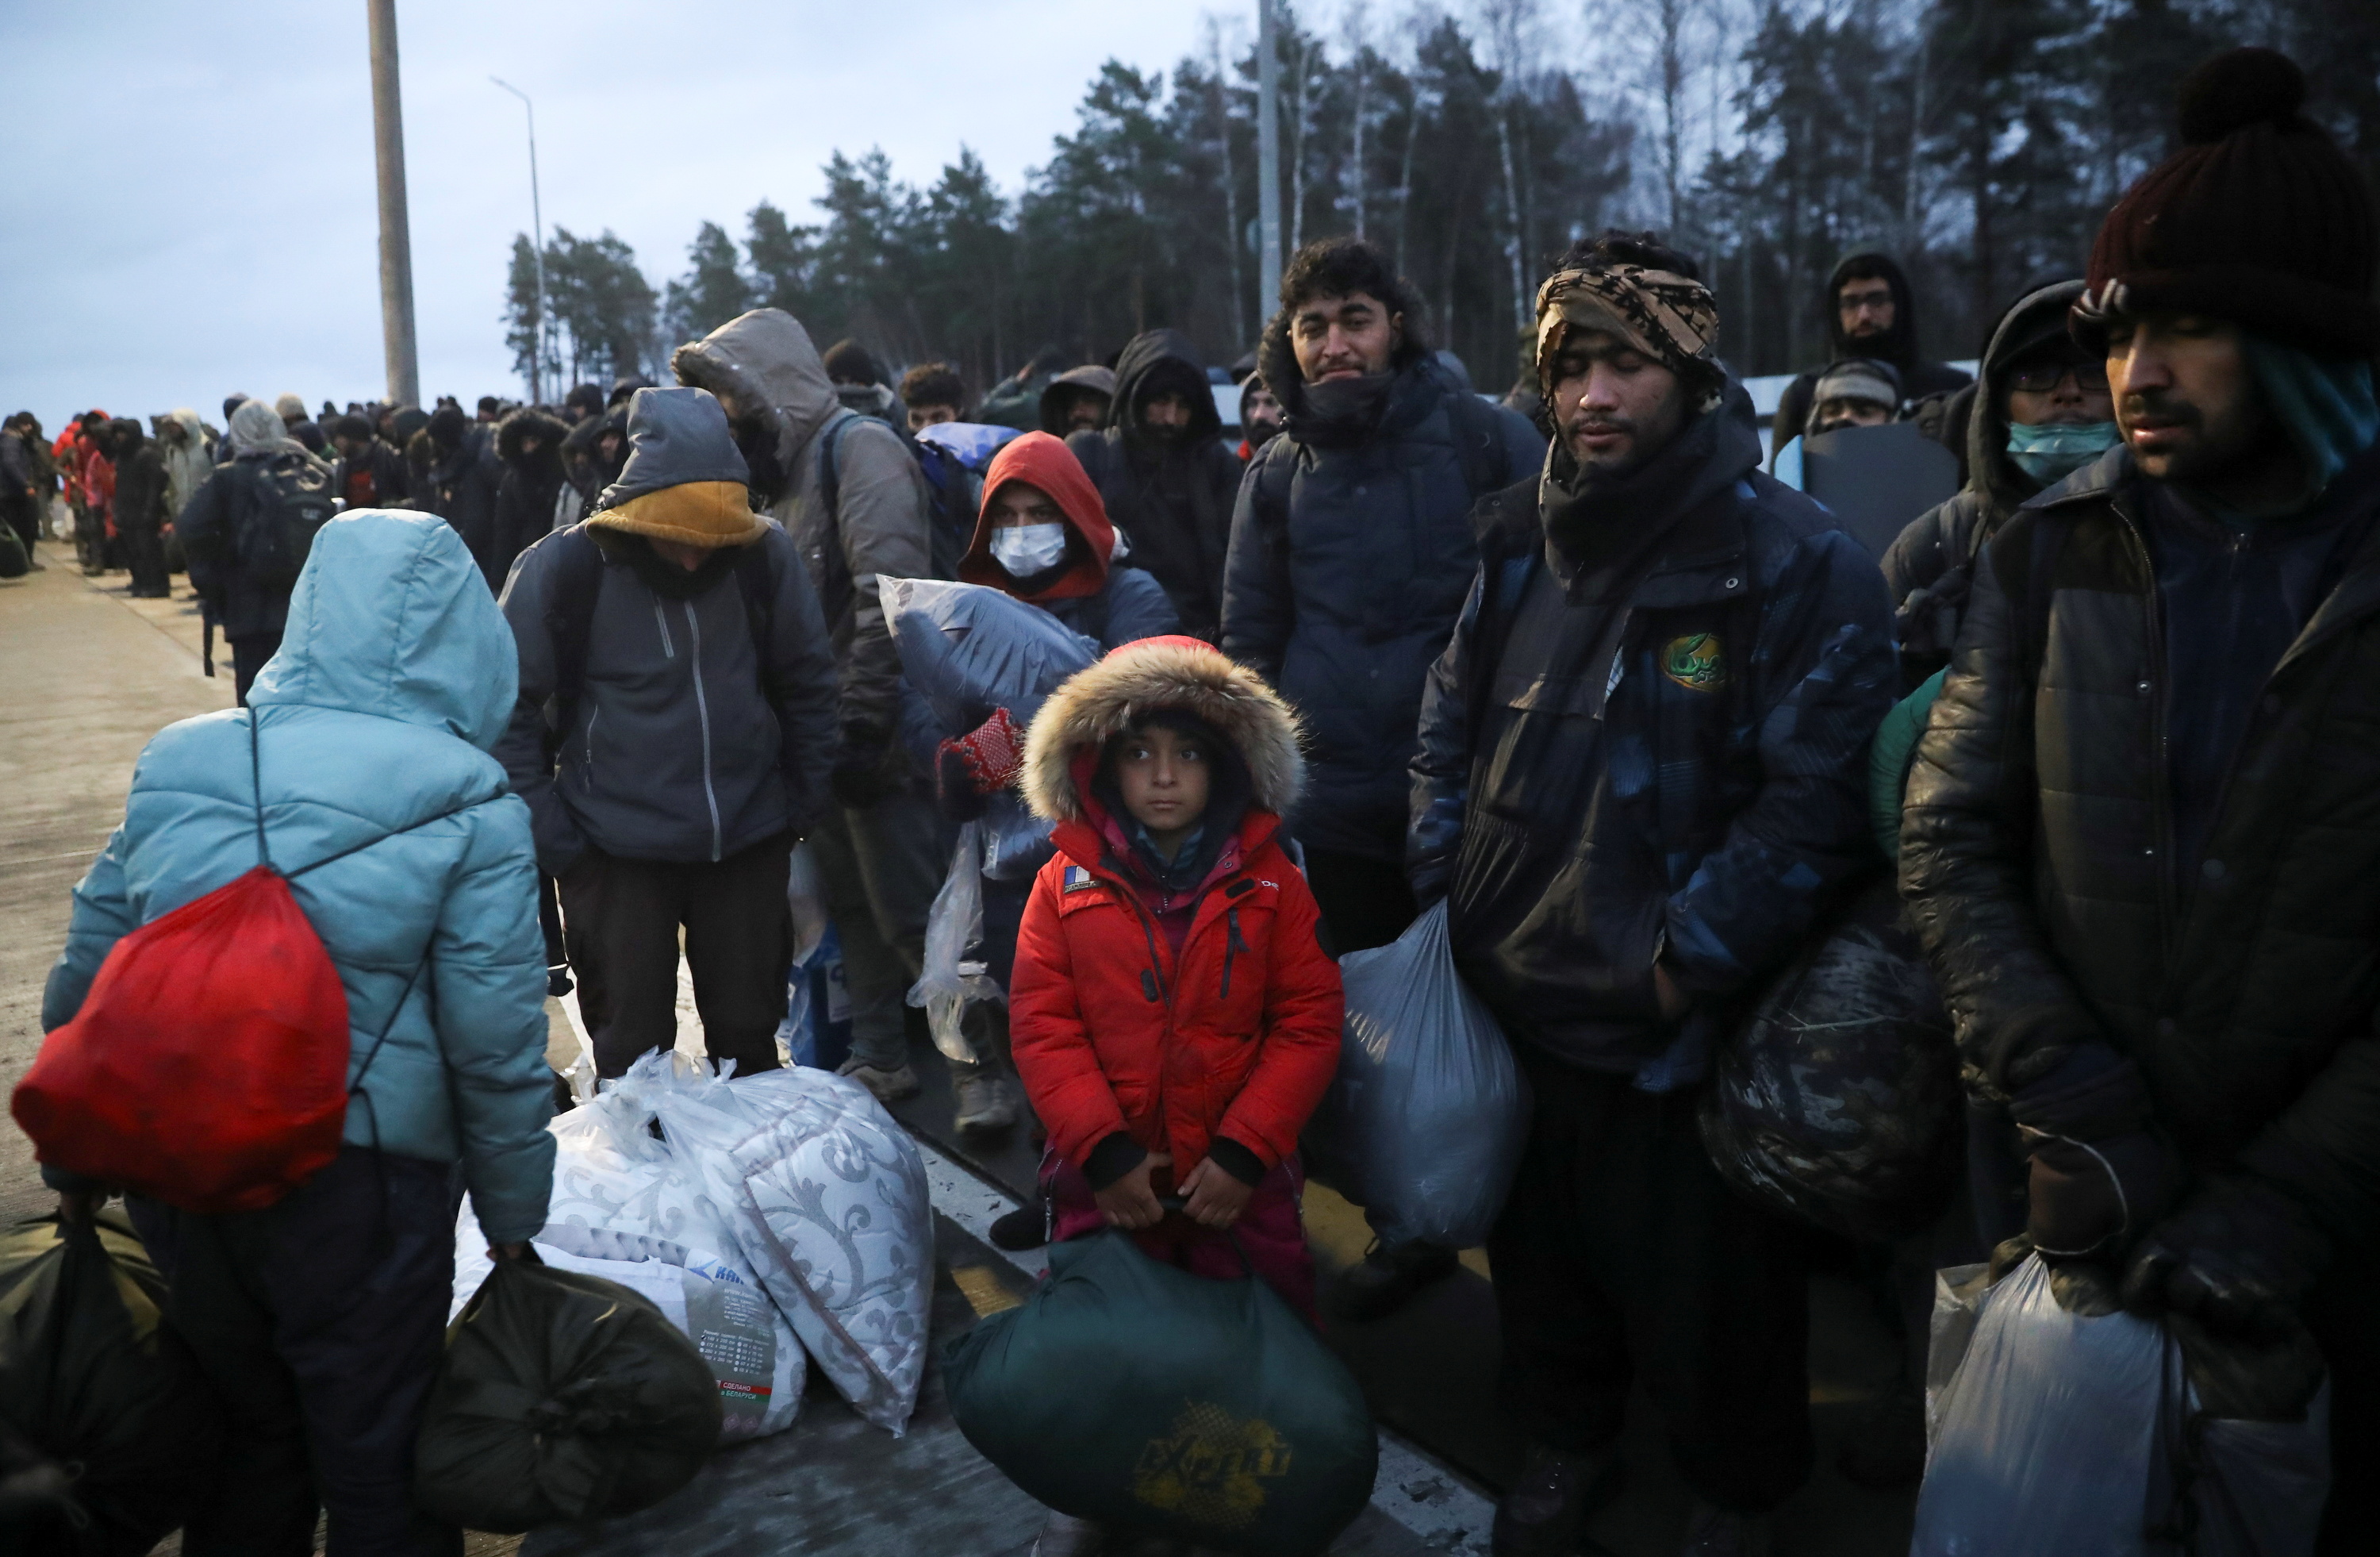 Migrants gather at a transport and logistics centre near the Belarusian-Polish border in the Grodno region, Belarus, November 18, 2021.  REUTERS/Kacper Pempel